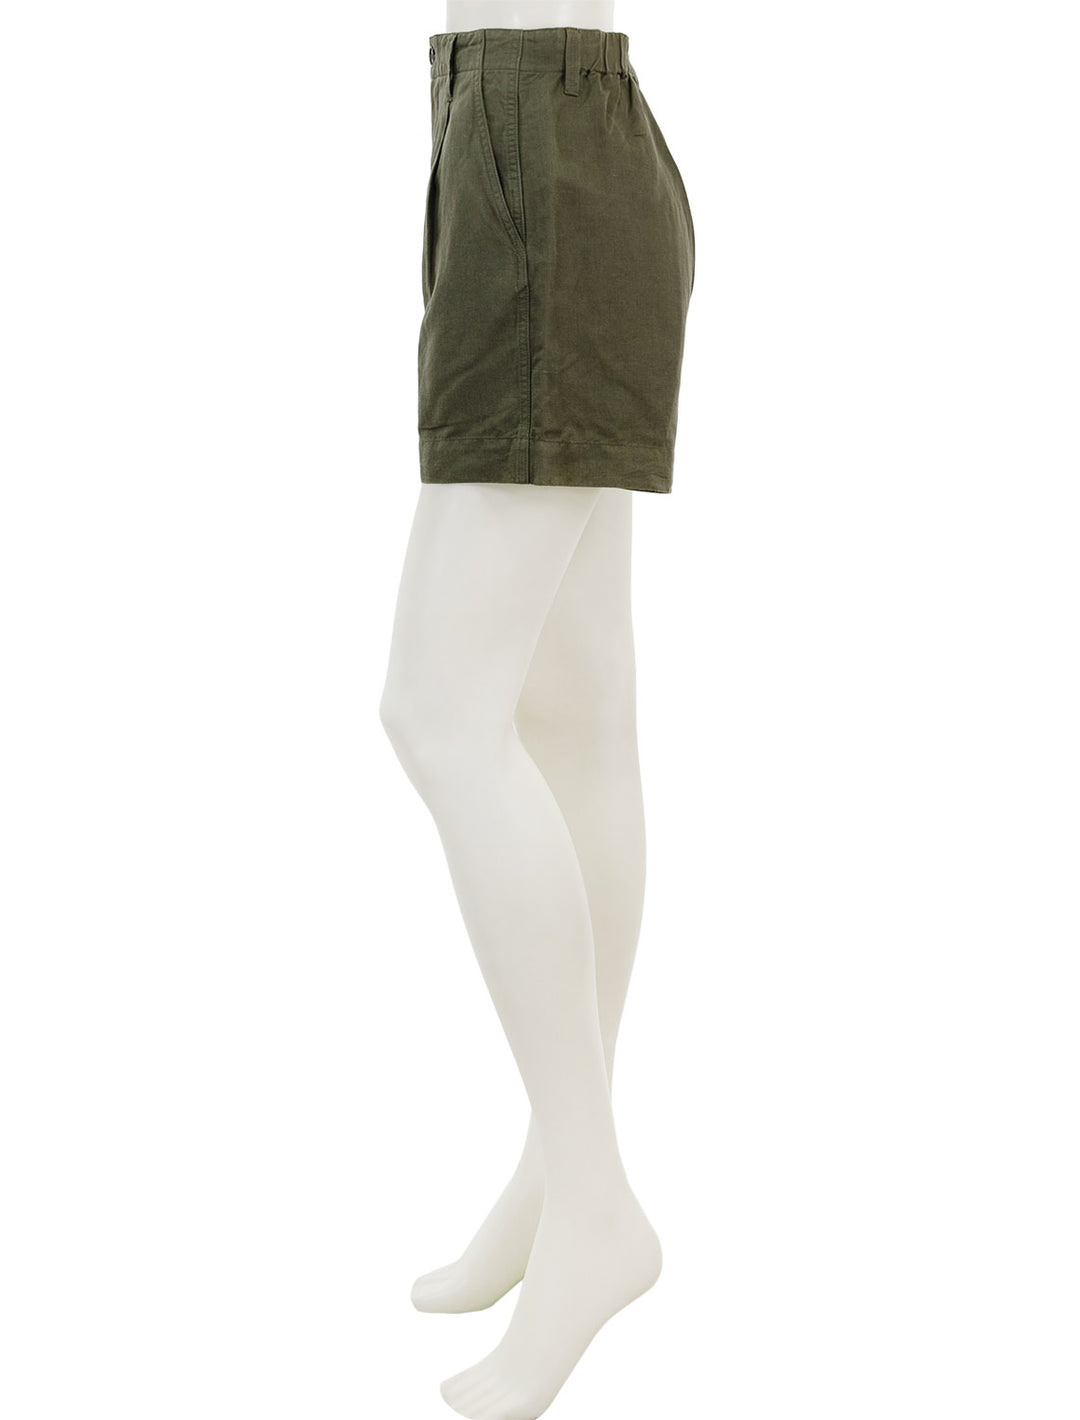 Side view of Alex Mill's pleated twill shorts in pulgia olive.